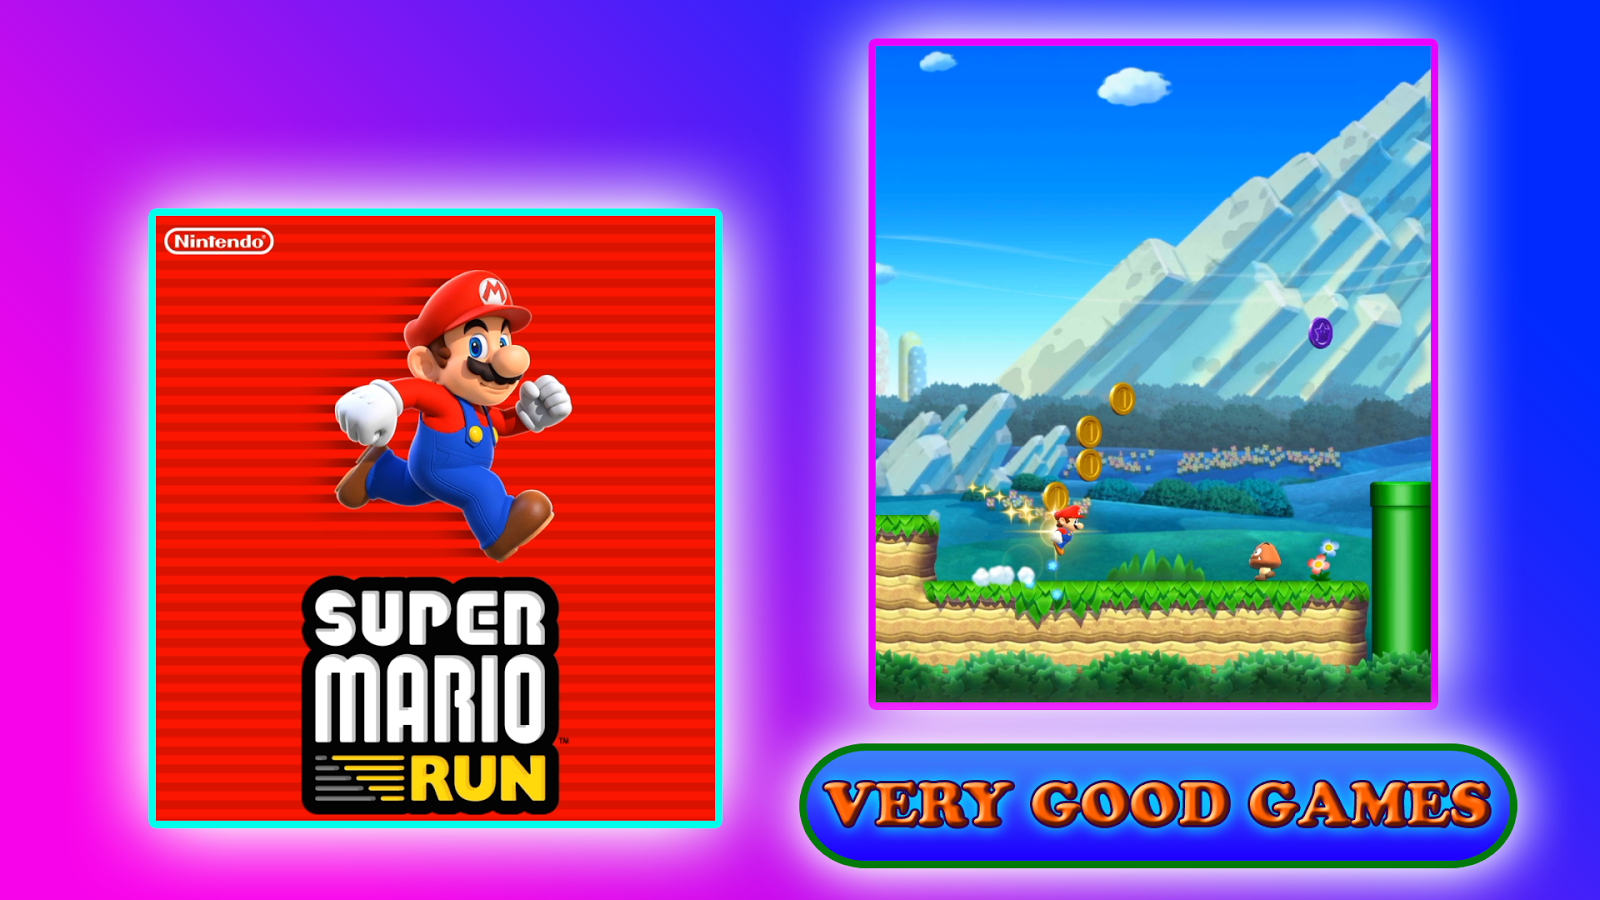 Running adventure game for Android and iPhone - Super Mario Run